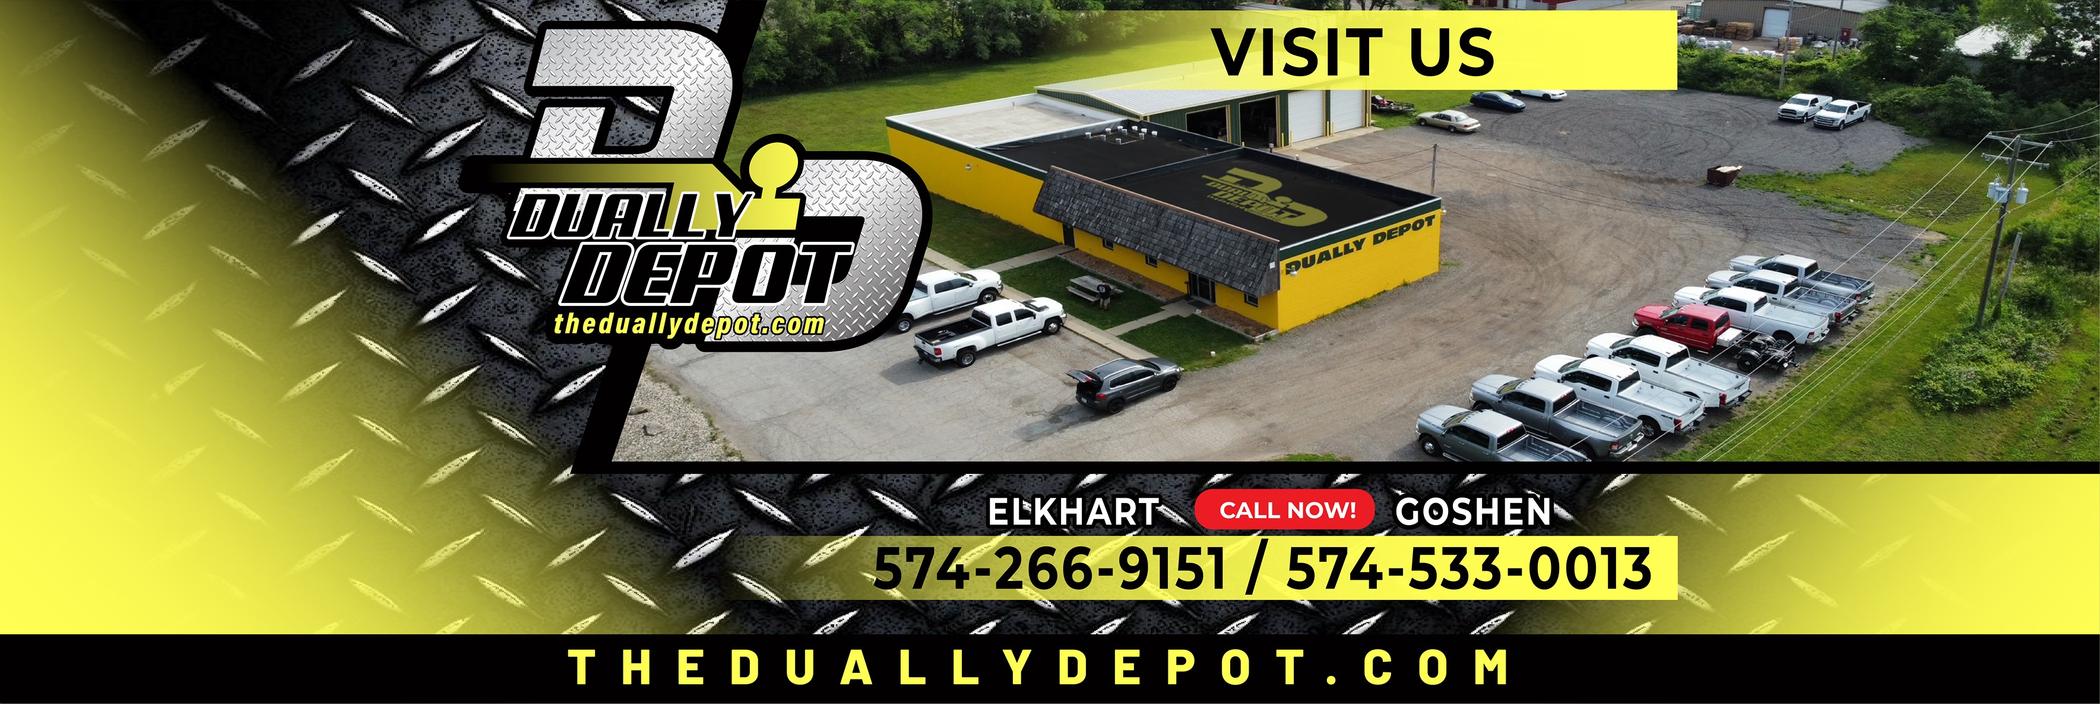 The Dually Depot